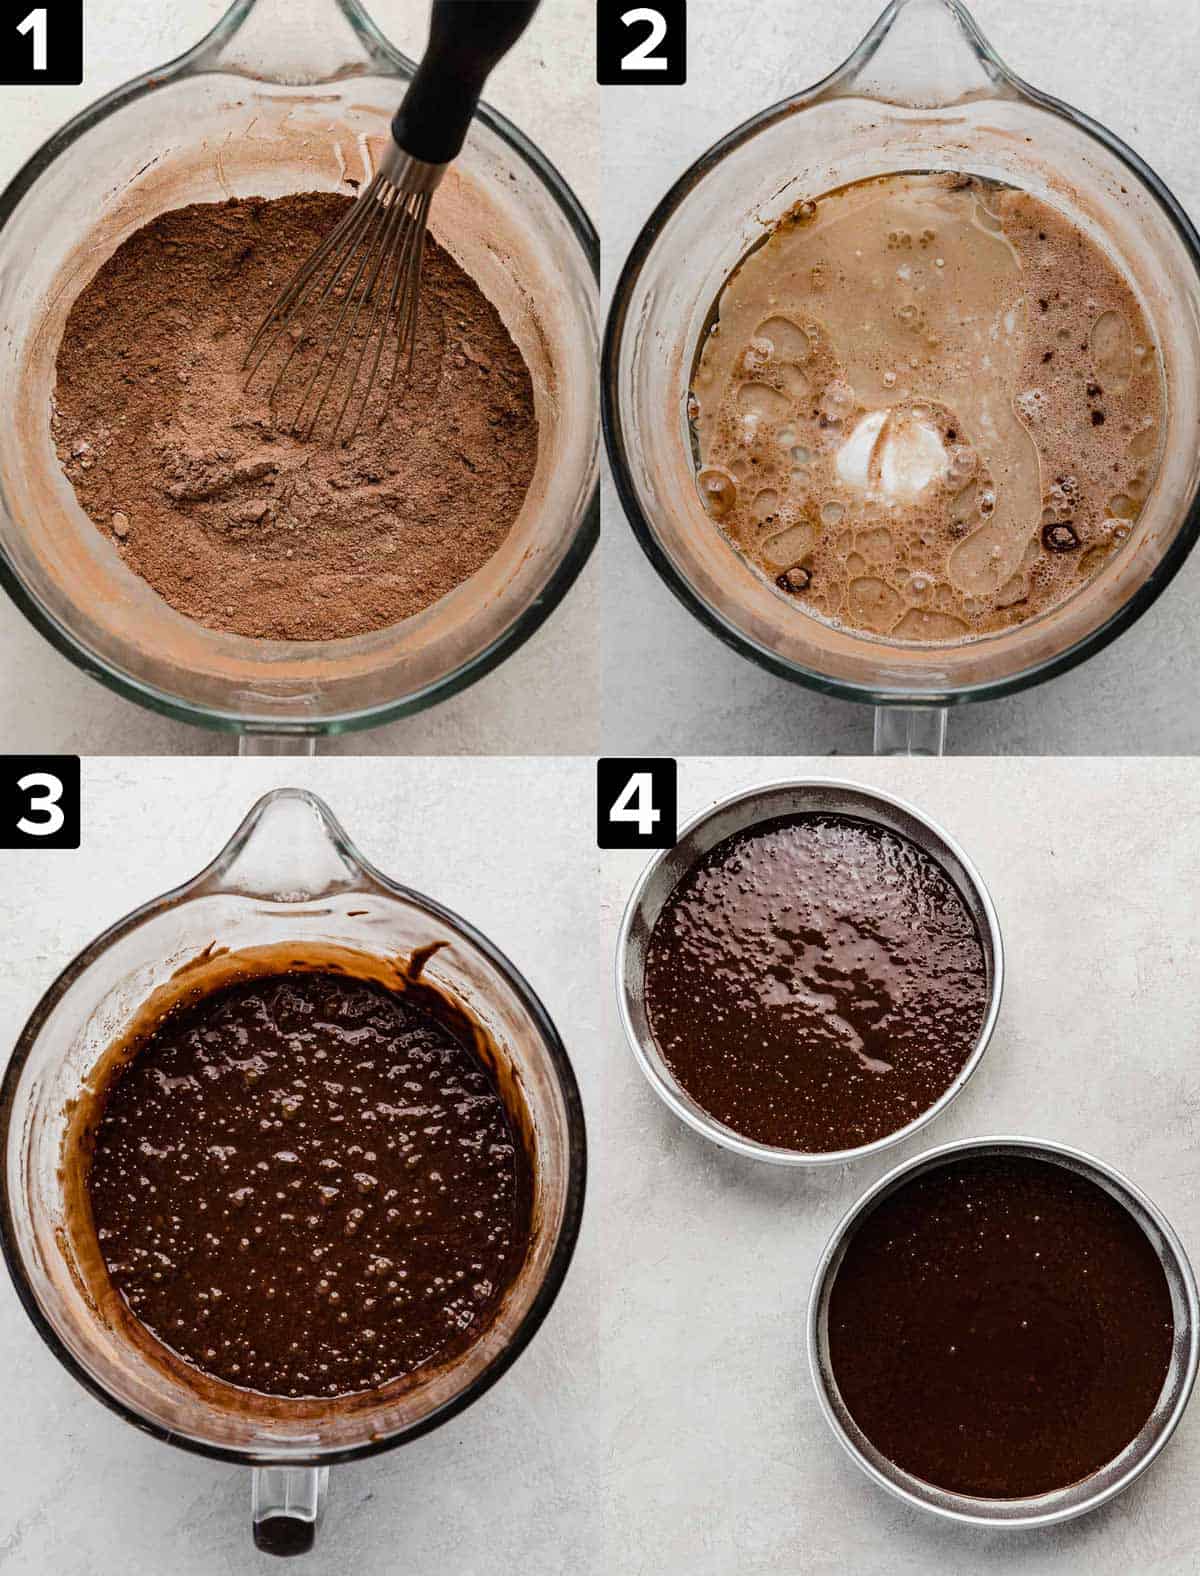 Four images showing the making of the best chocolate cake being made in a glass bowl.